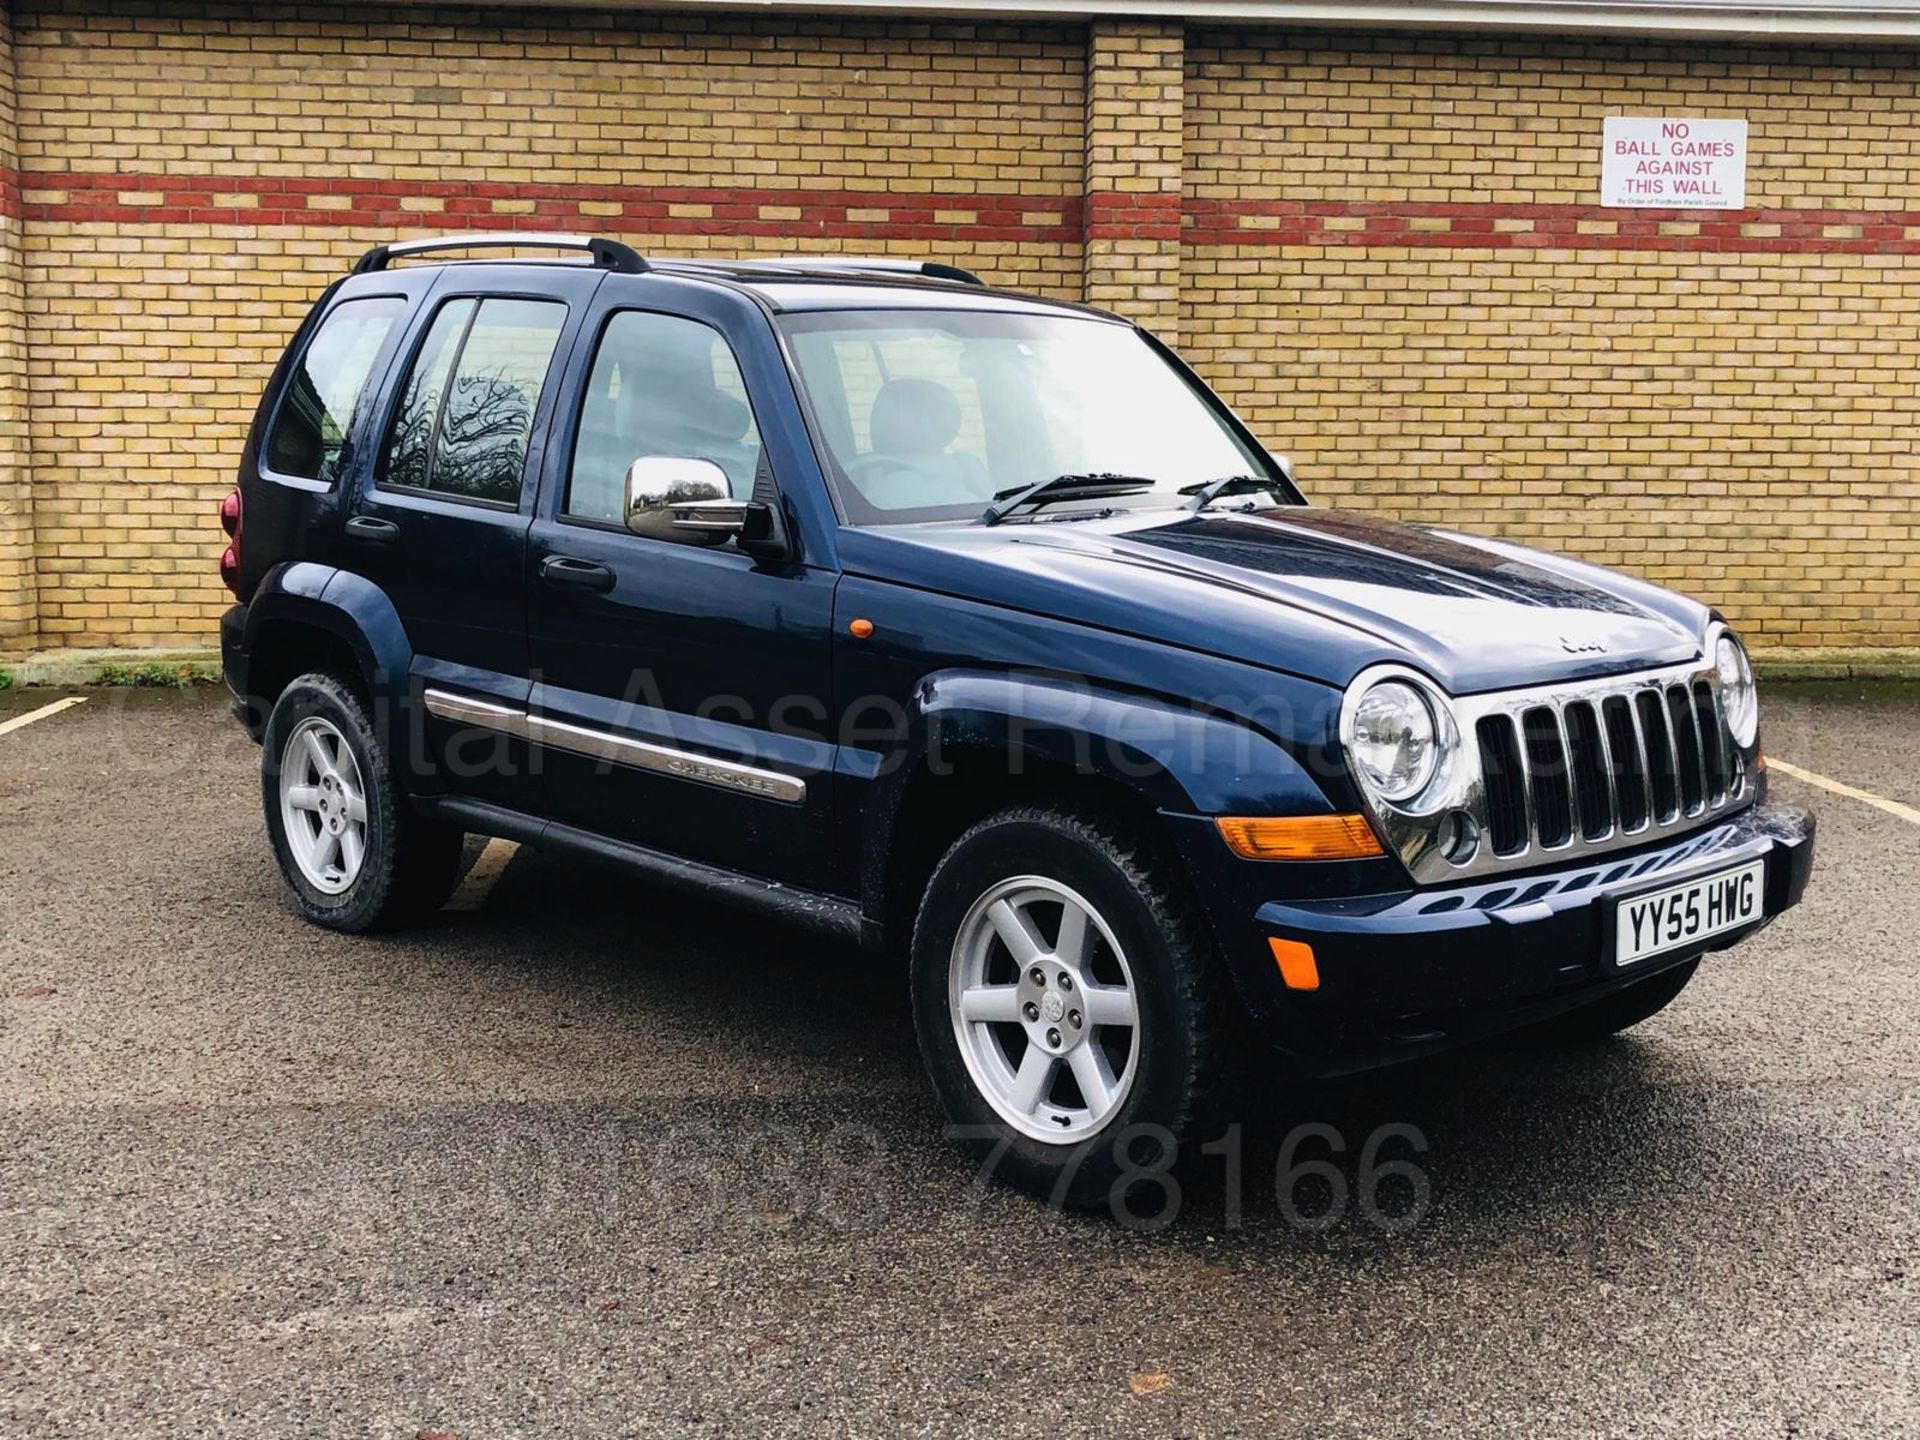 (ON SALE) JEEP CHEROKEE *LIMITED CRD* (2006 MODEL) '2.8 DIESEL (161 BHP) 6 SPEED' *AIR CON* (NO VAT) - Image 2 of 40